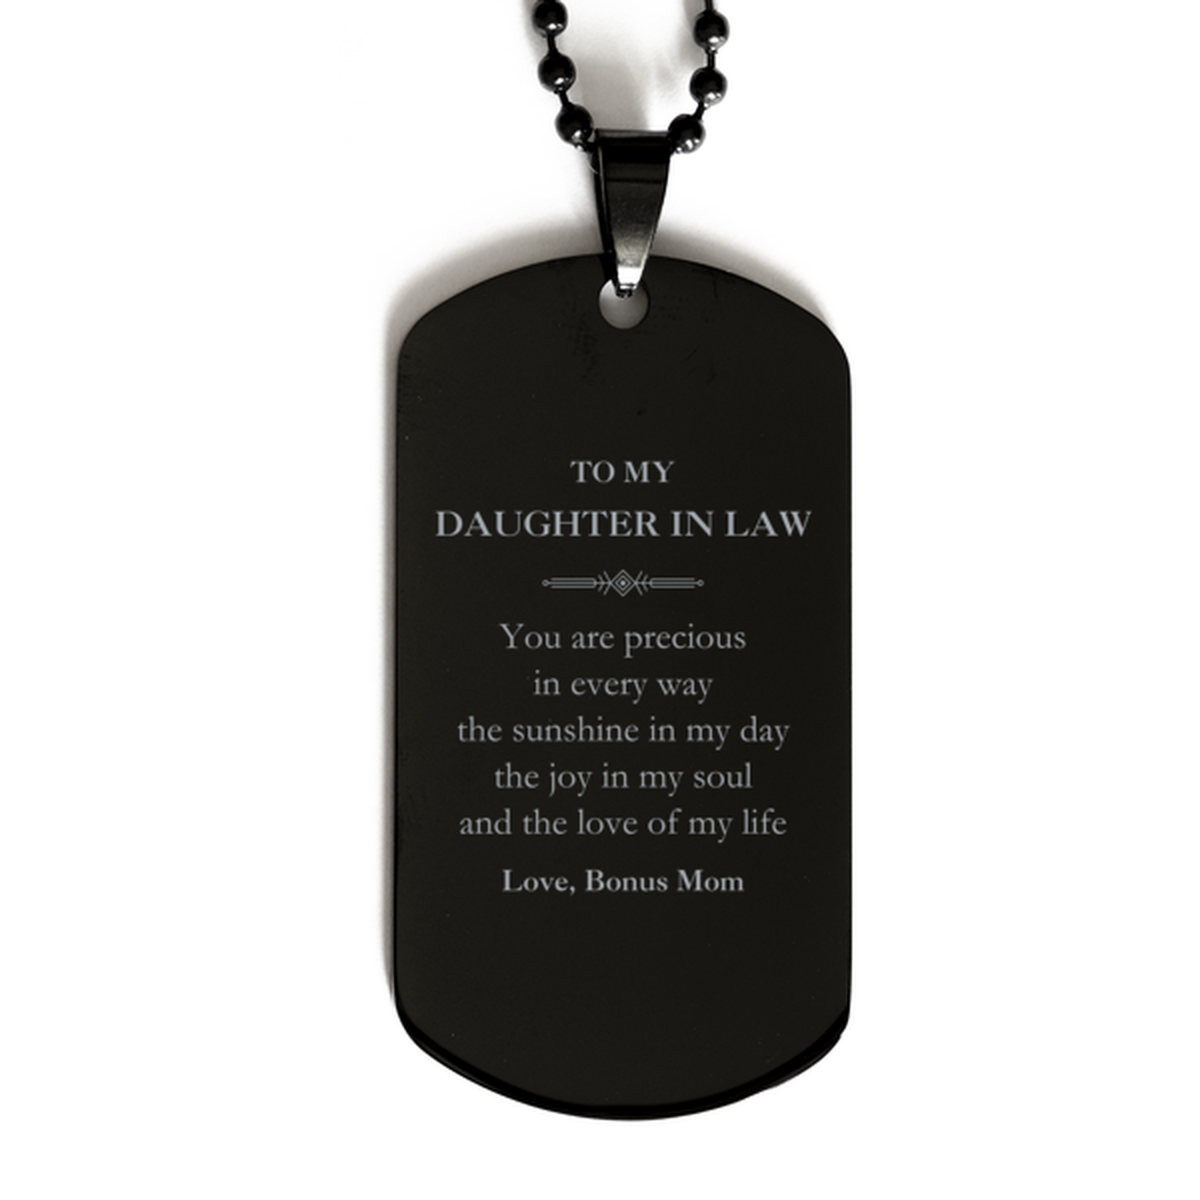 Graduation Gifts for Daughter In Law Black Dog Tag Present from Bonus Mom, Christmas Daughter In Law Birthday Gifts Daughter In Law You are precious in every way the sunshine in my day. Love, Bonus Mom